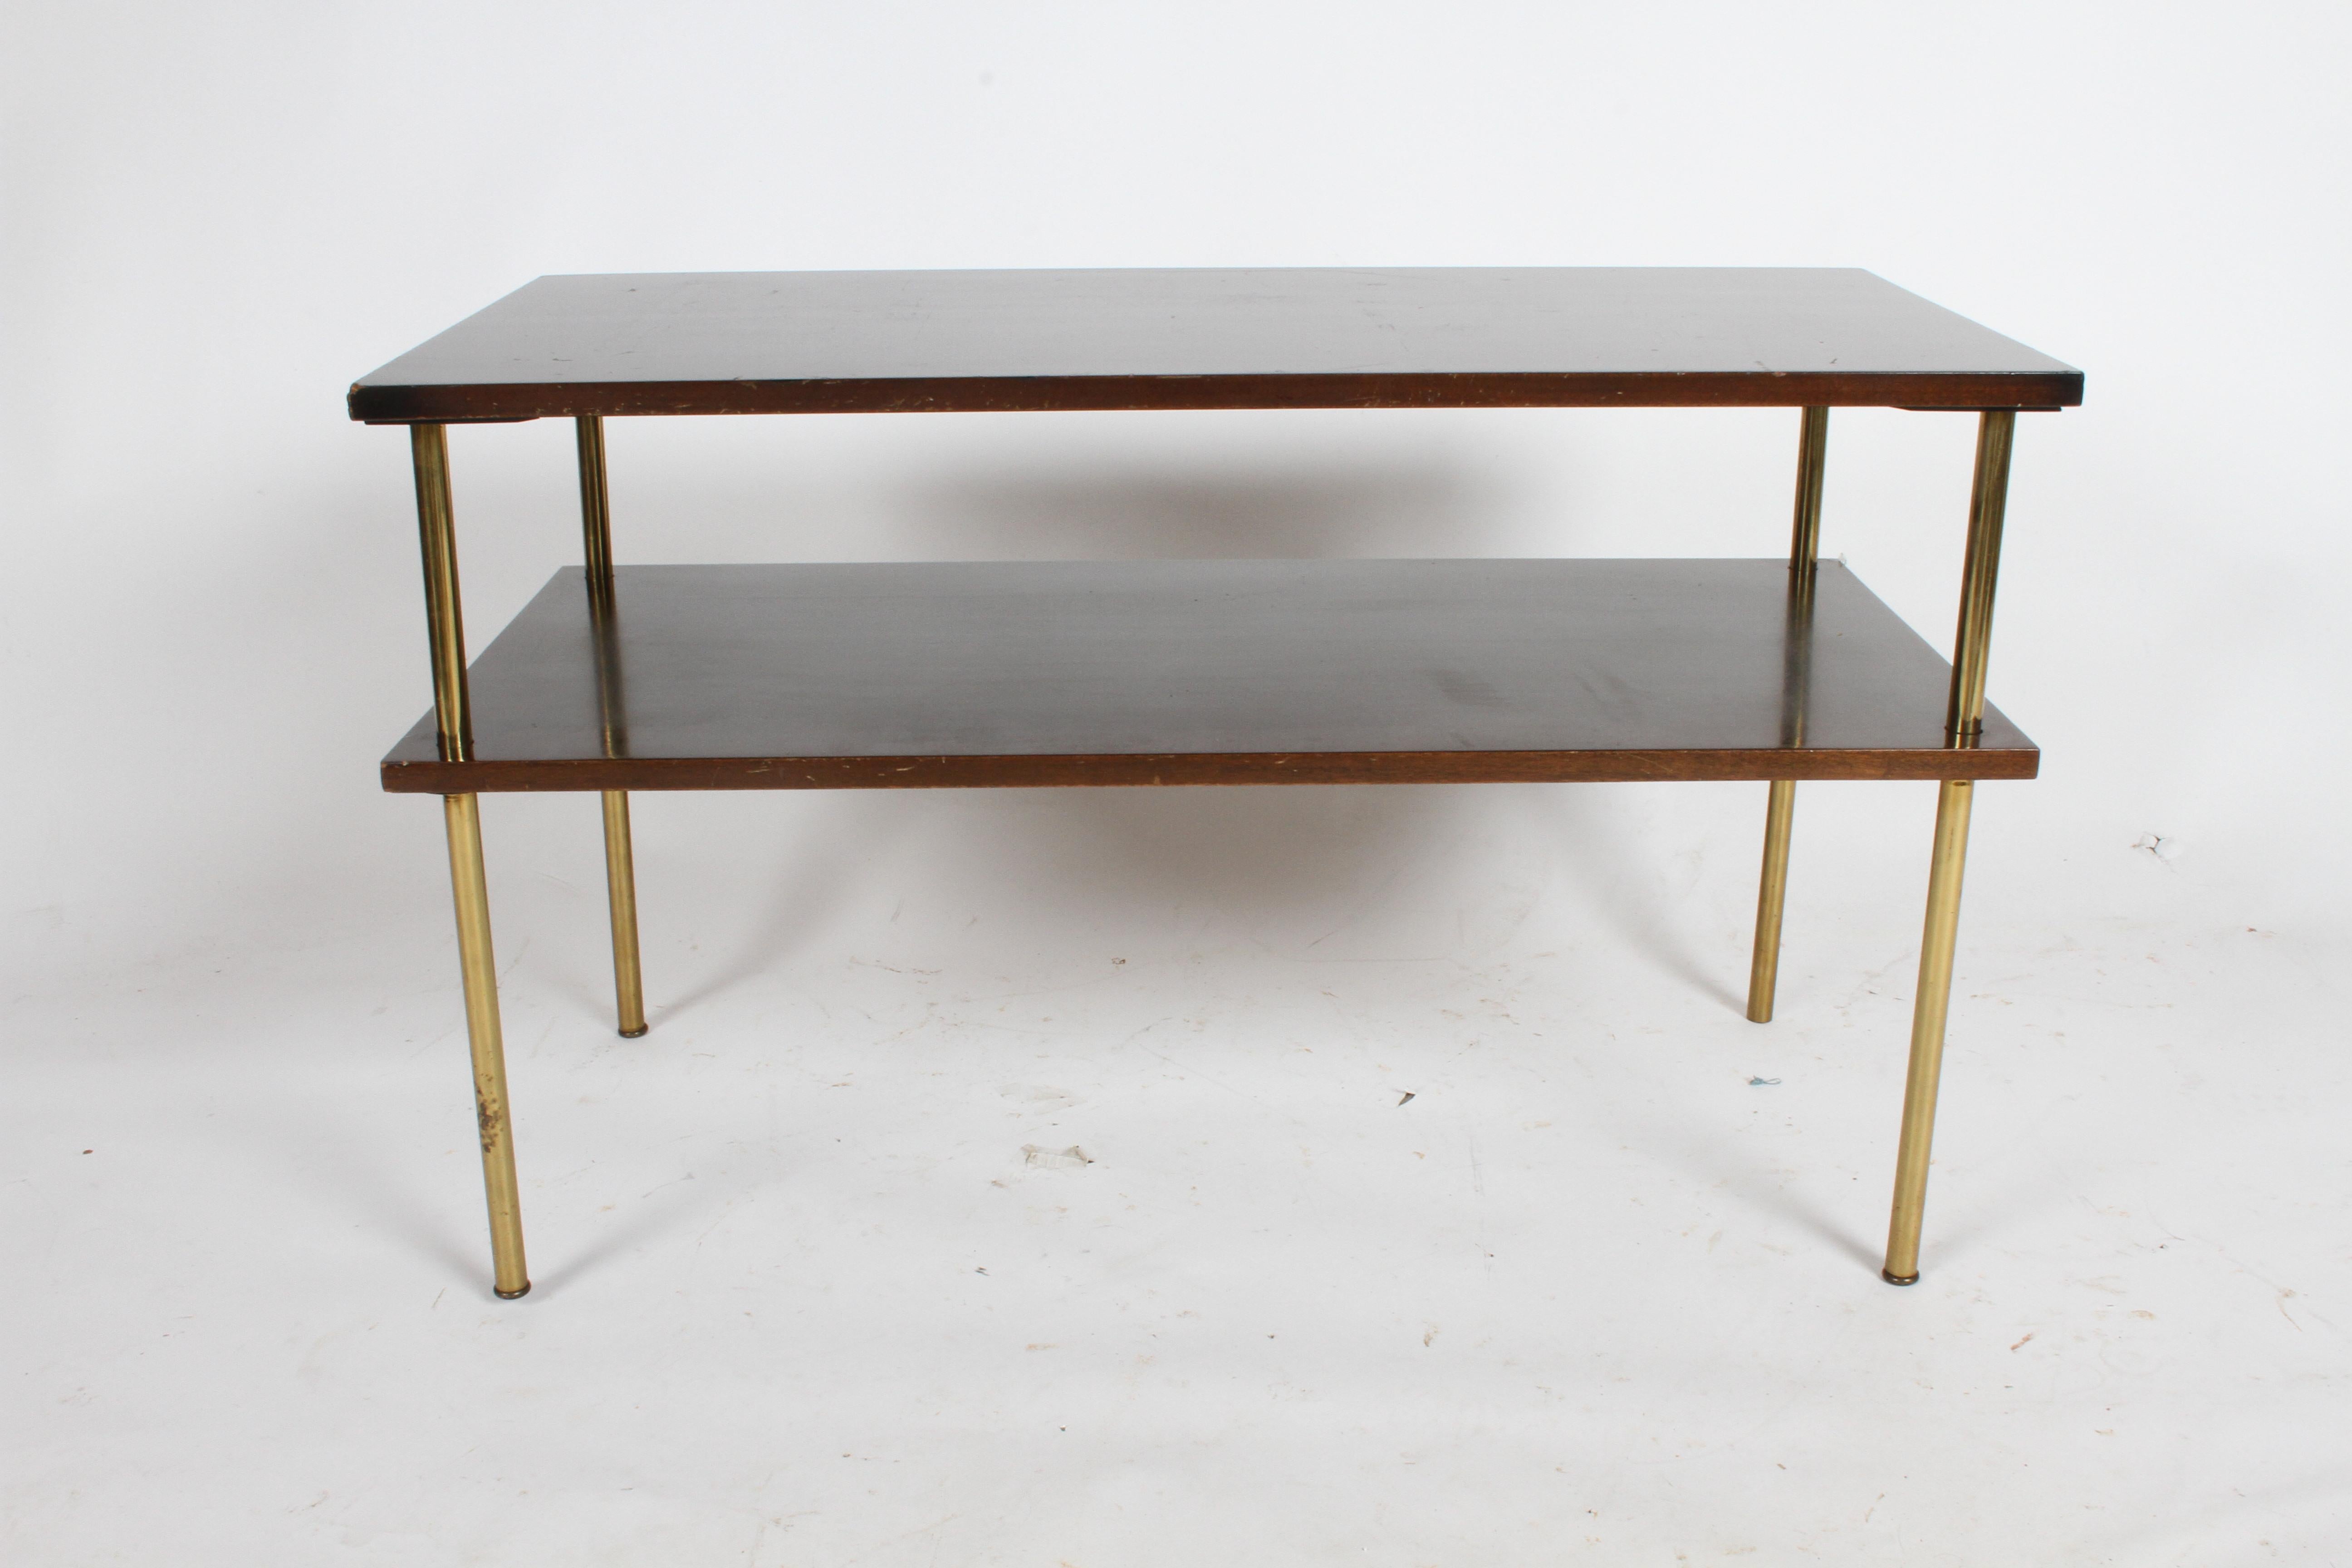 Mid-Century Modern Harvey Probber minimalist designed low two tier console, TV, Audio or Media table shown in original dark mahogany finish with four round brass legs. Currently finish shows wear, to be refinished prior to shipping, custom colors